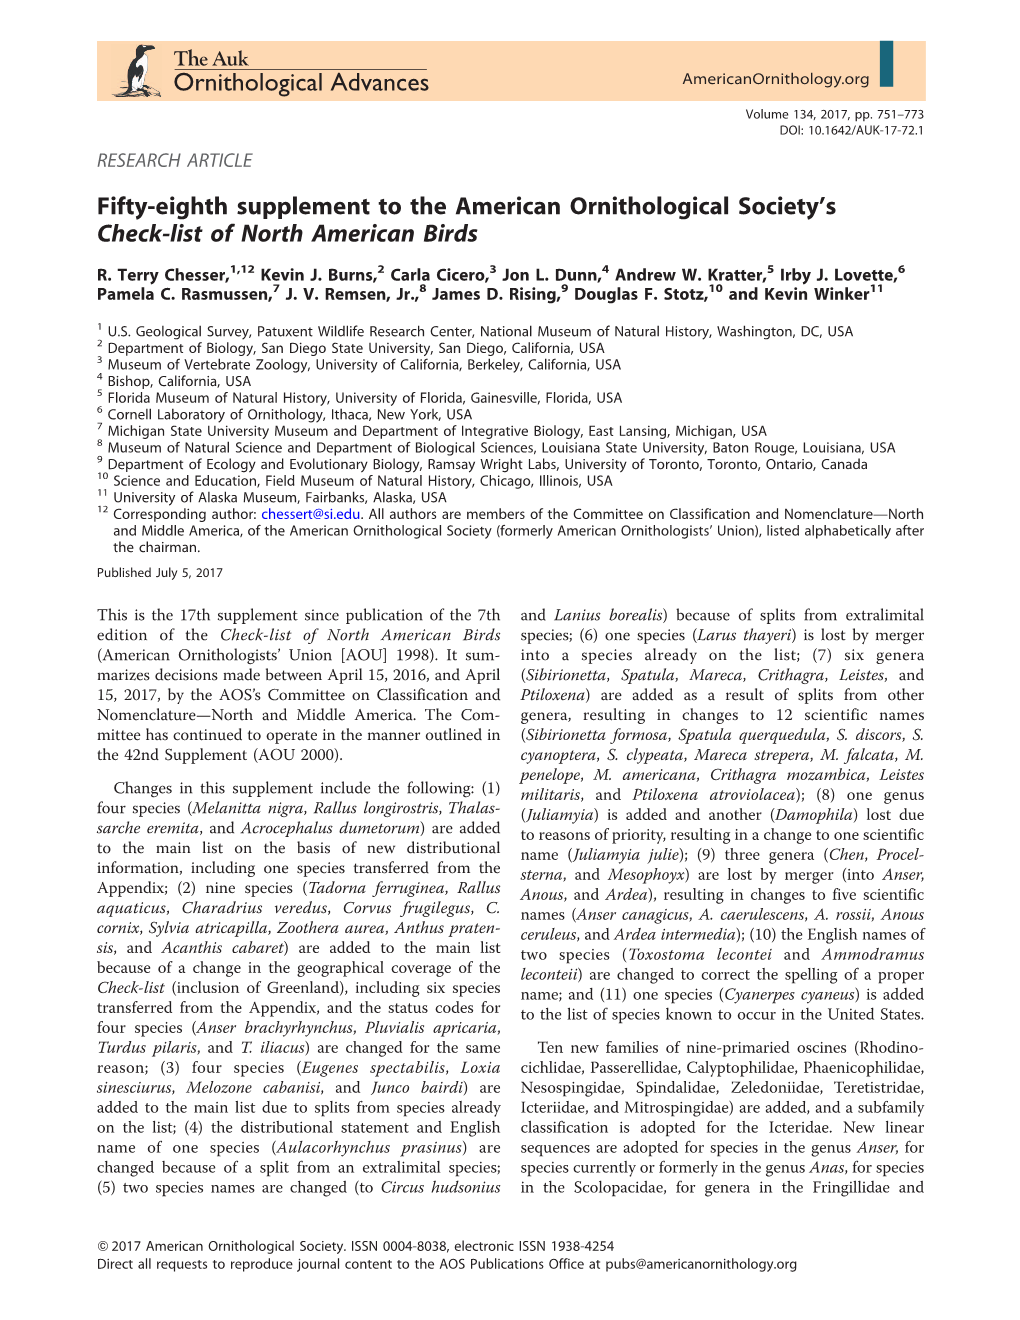 Fifty-Eighth Supplement to the American Ornithological Society's